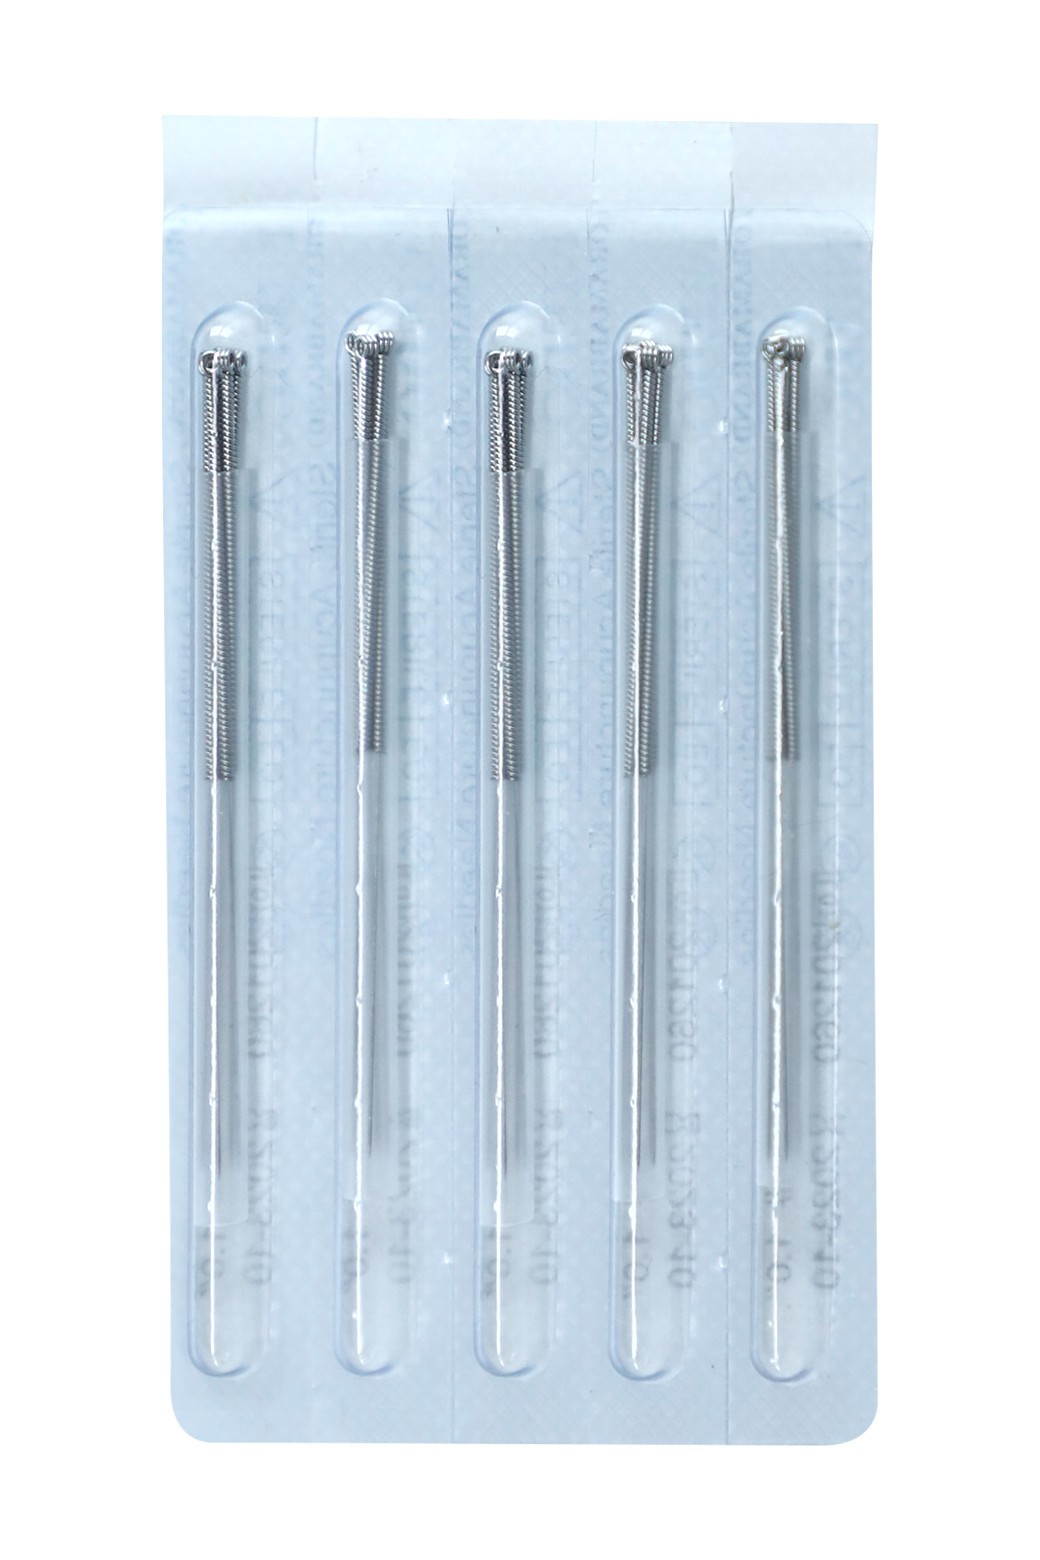 .25x13mm - Alpha Cluster Acupuncture Needle